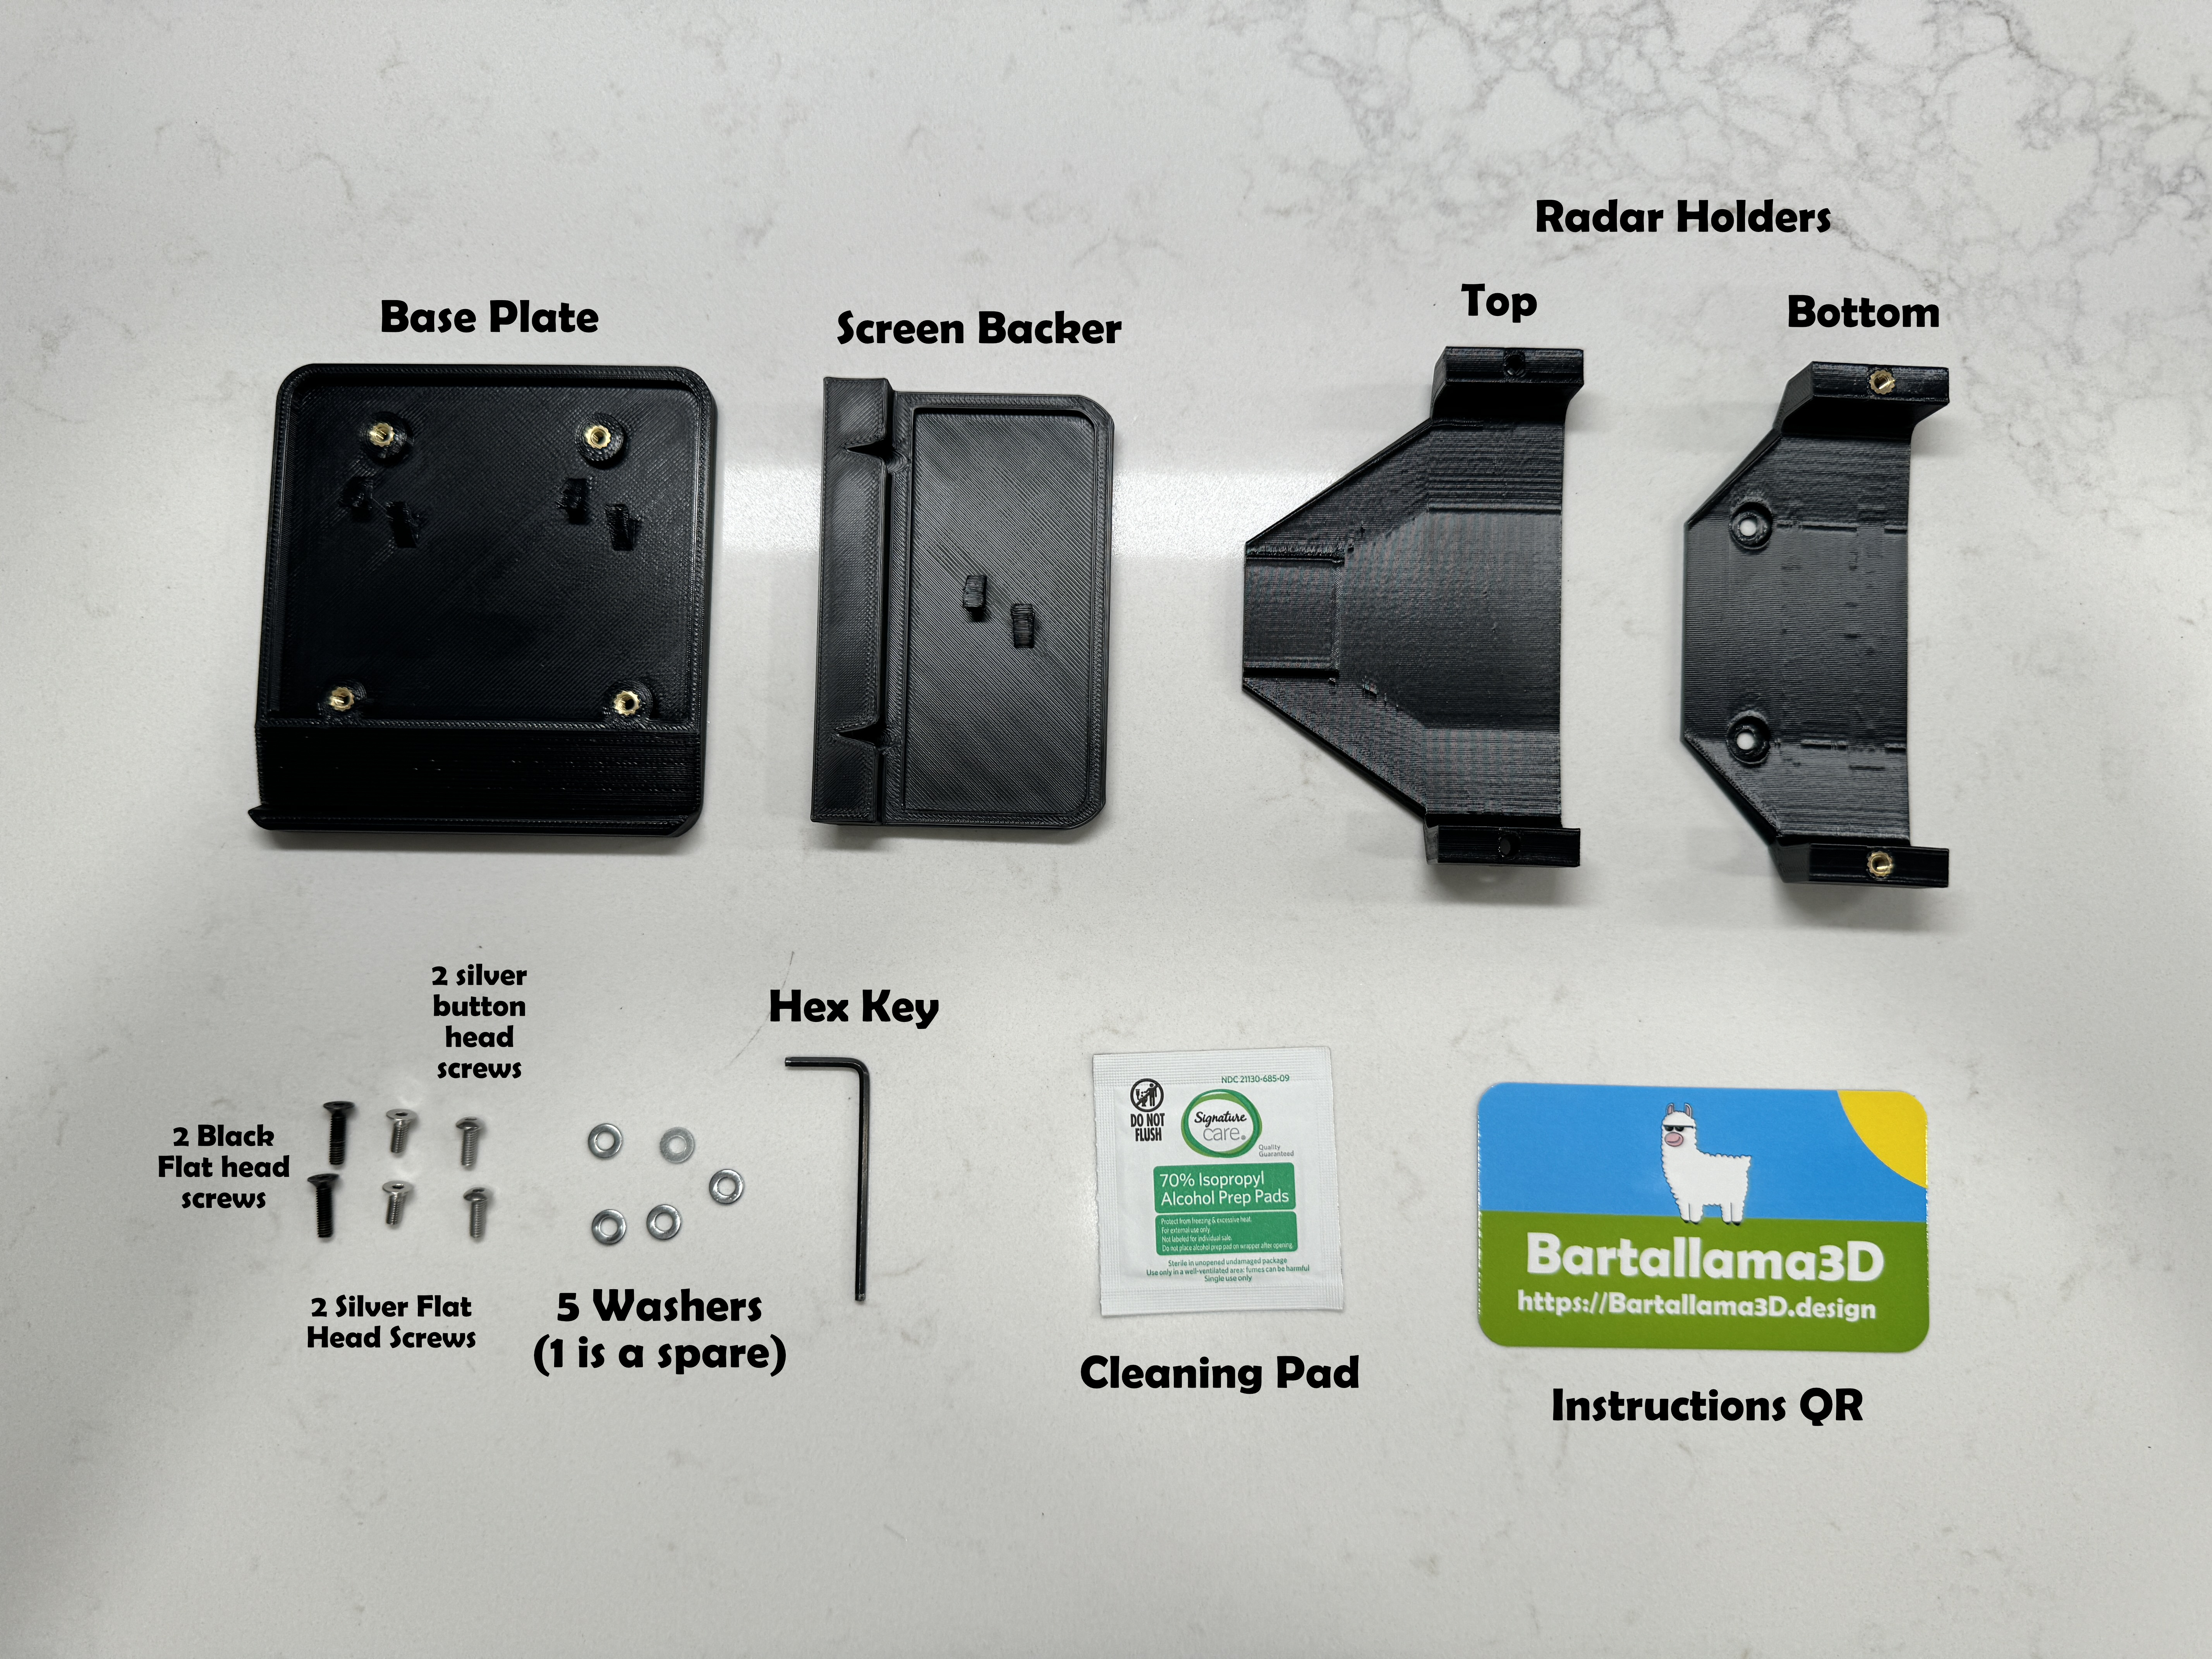 Image showing all included parts in the package